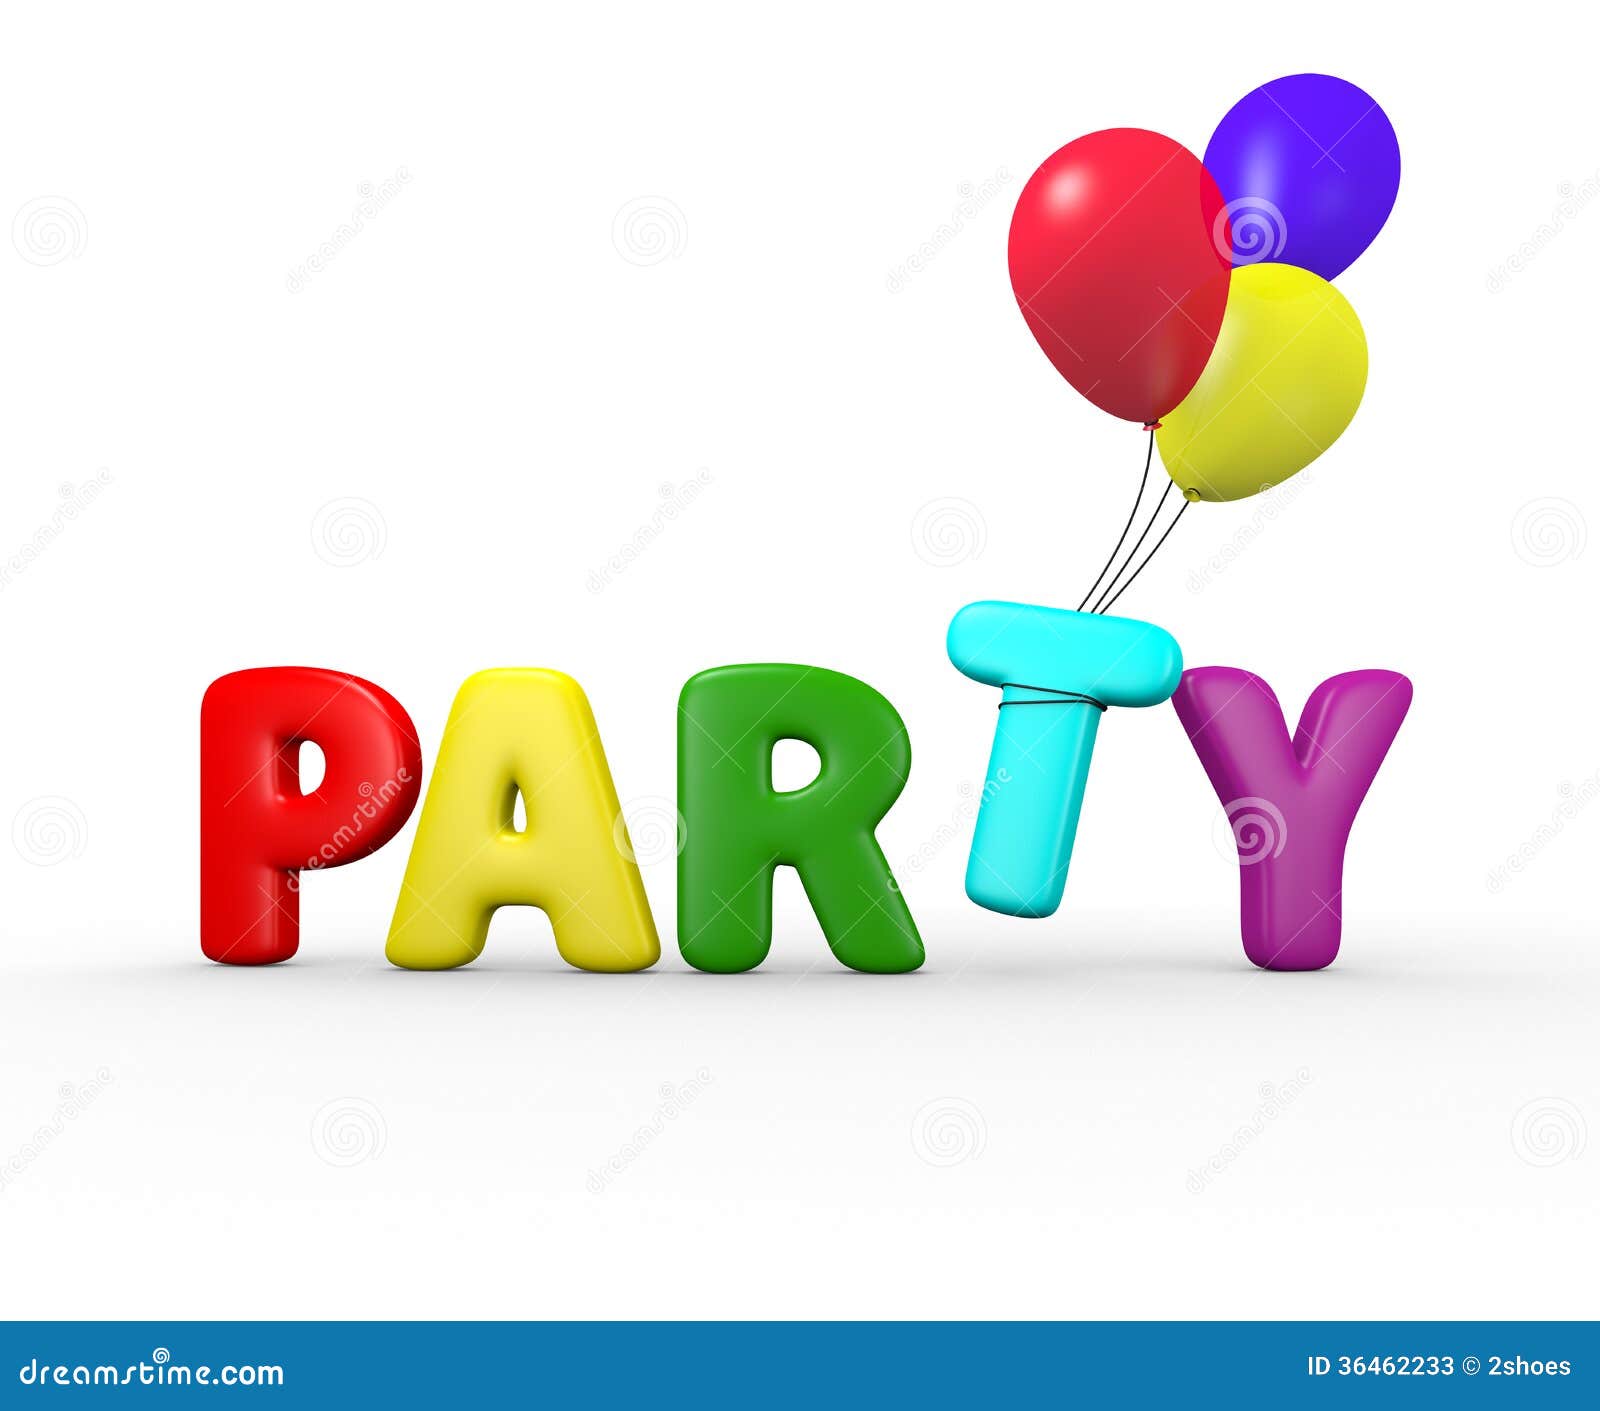 party-balloons-d-text-carrying-away-t-36462233.jpg